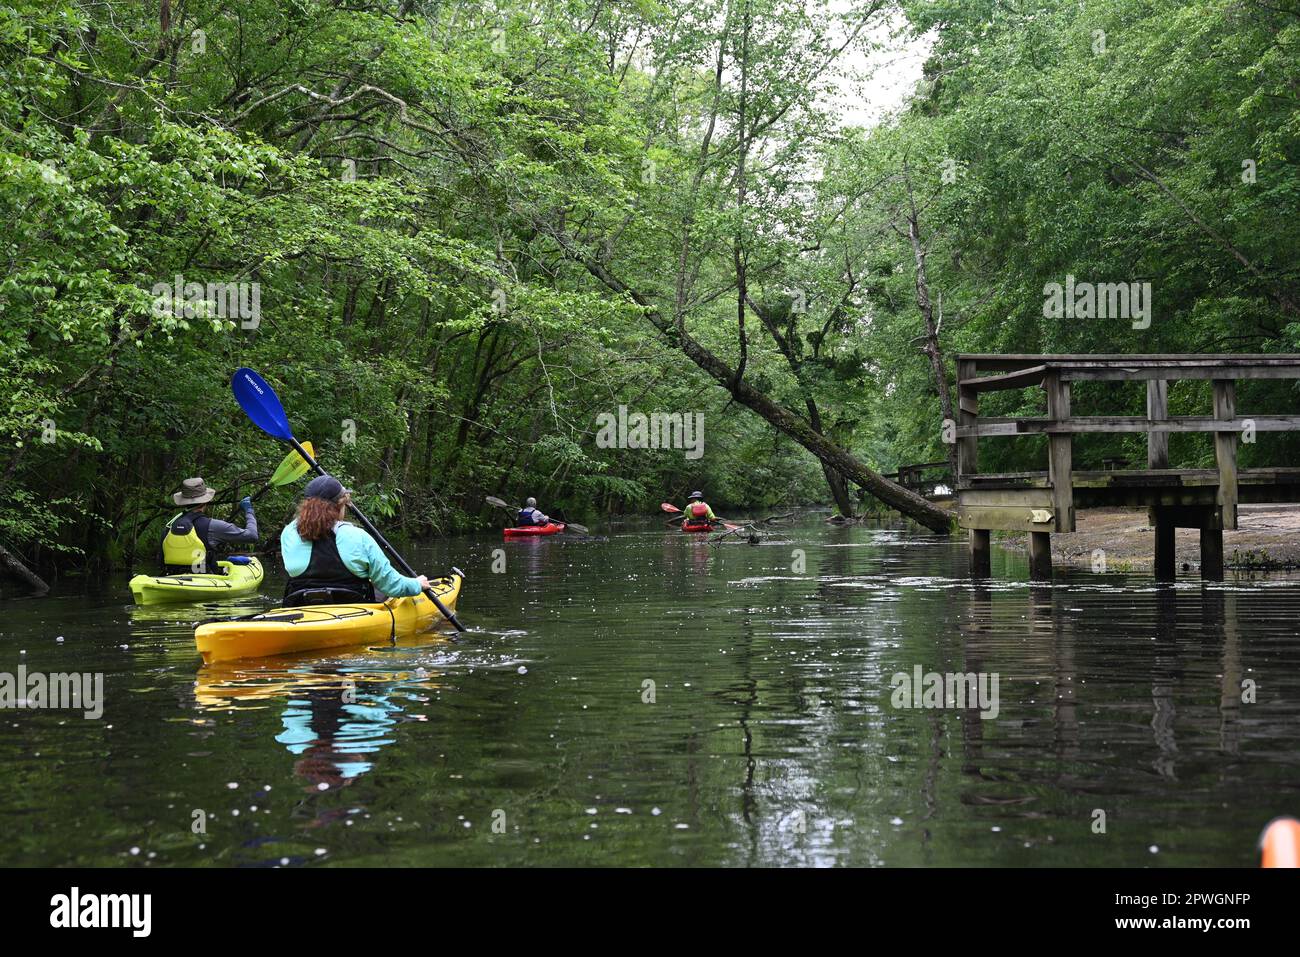 Kayaking through the dense tree canopy that shades the Cashie River outside of the town of Windsor in eastern North Carolina. Stock Photo